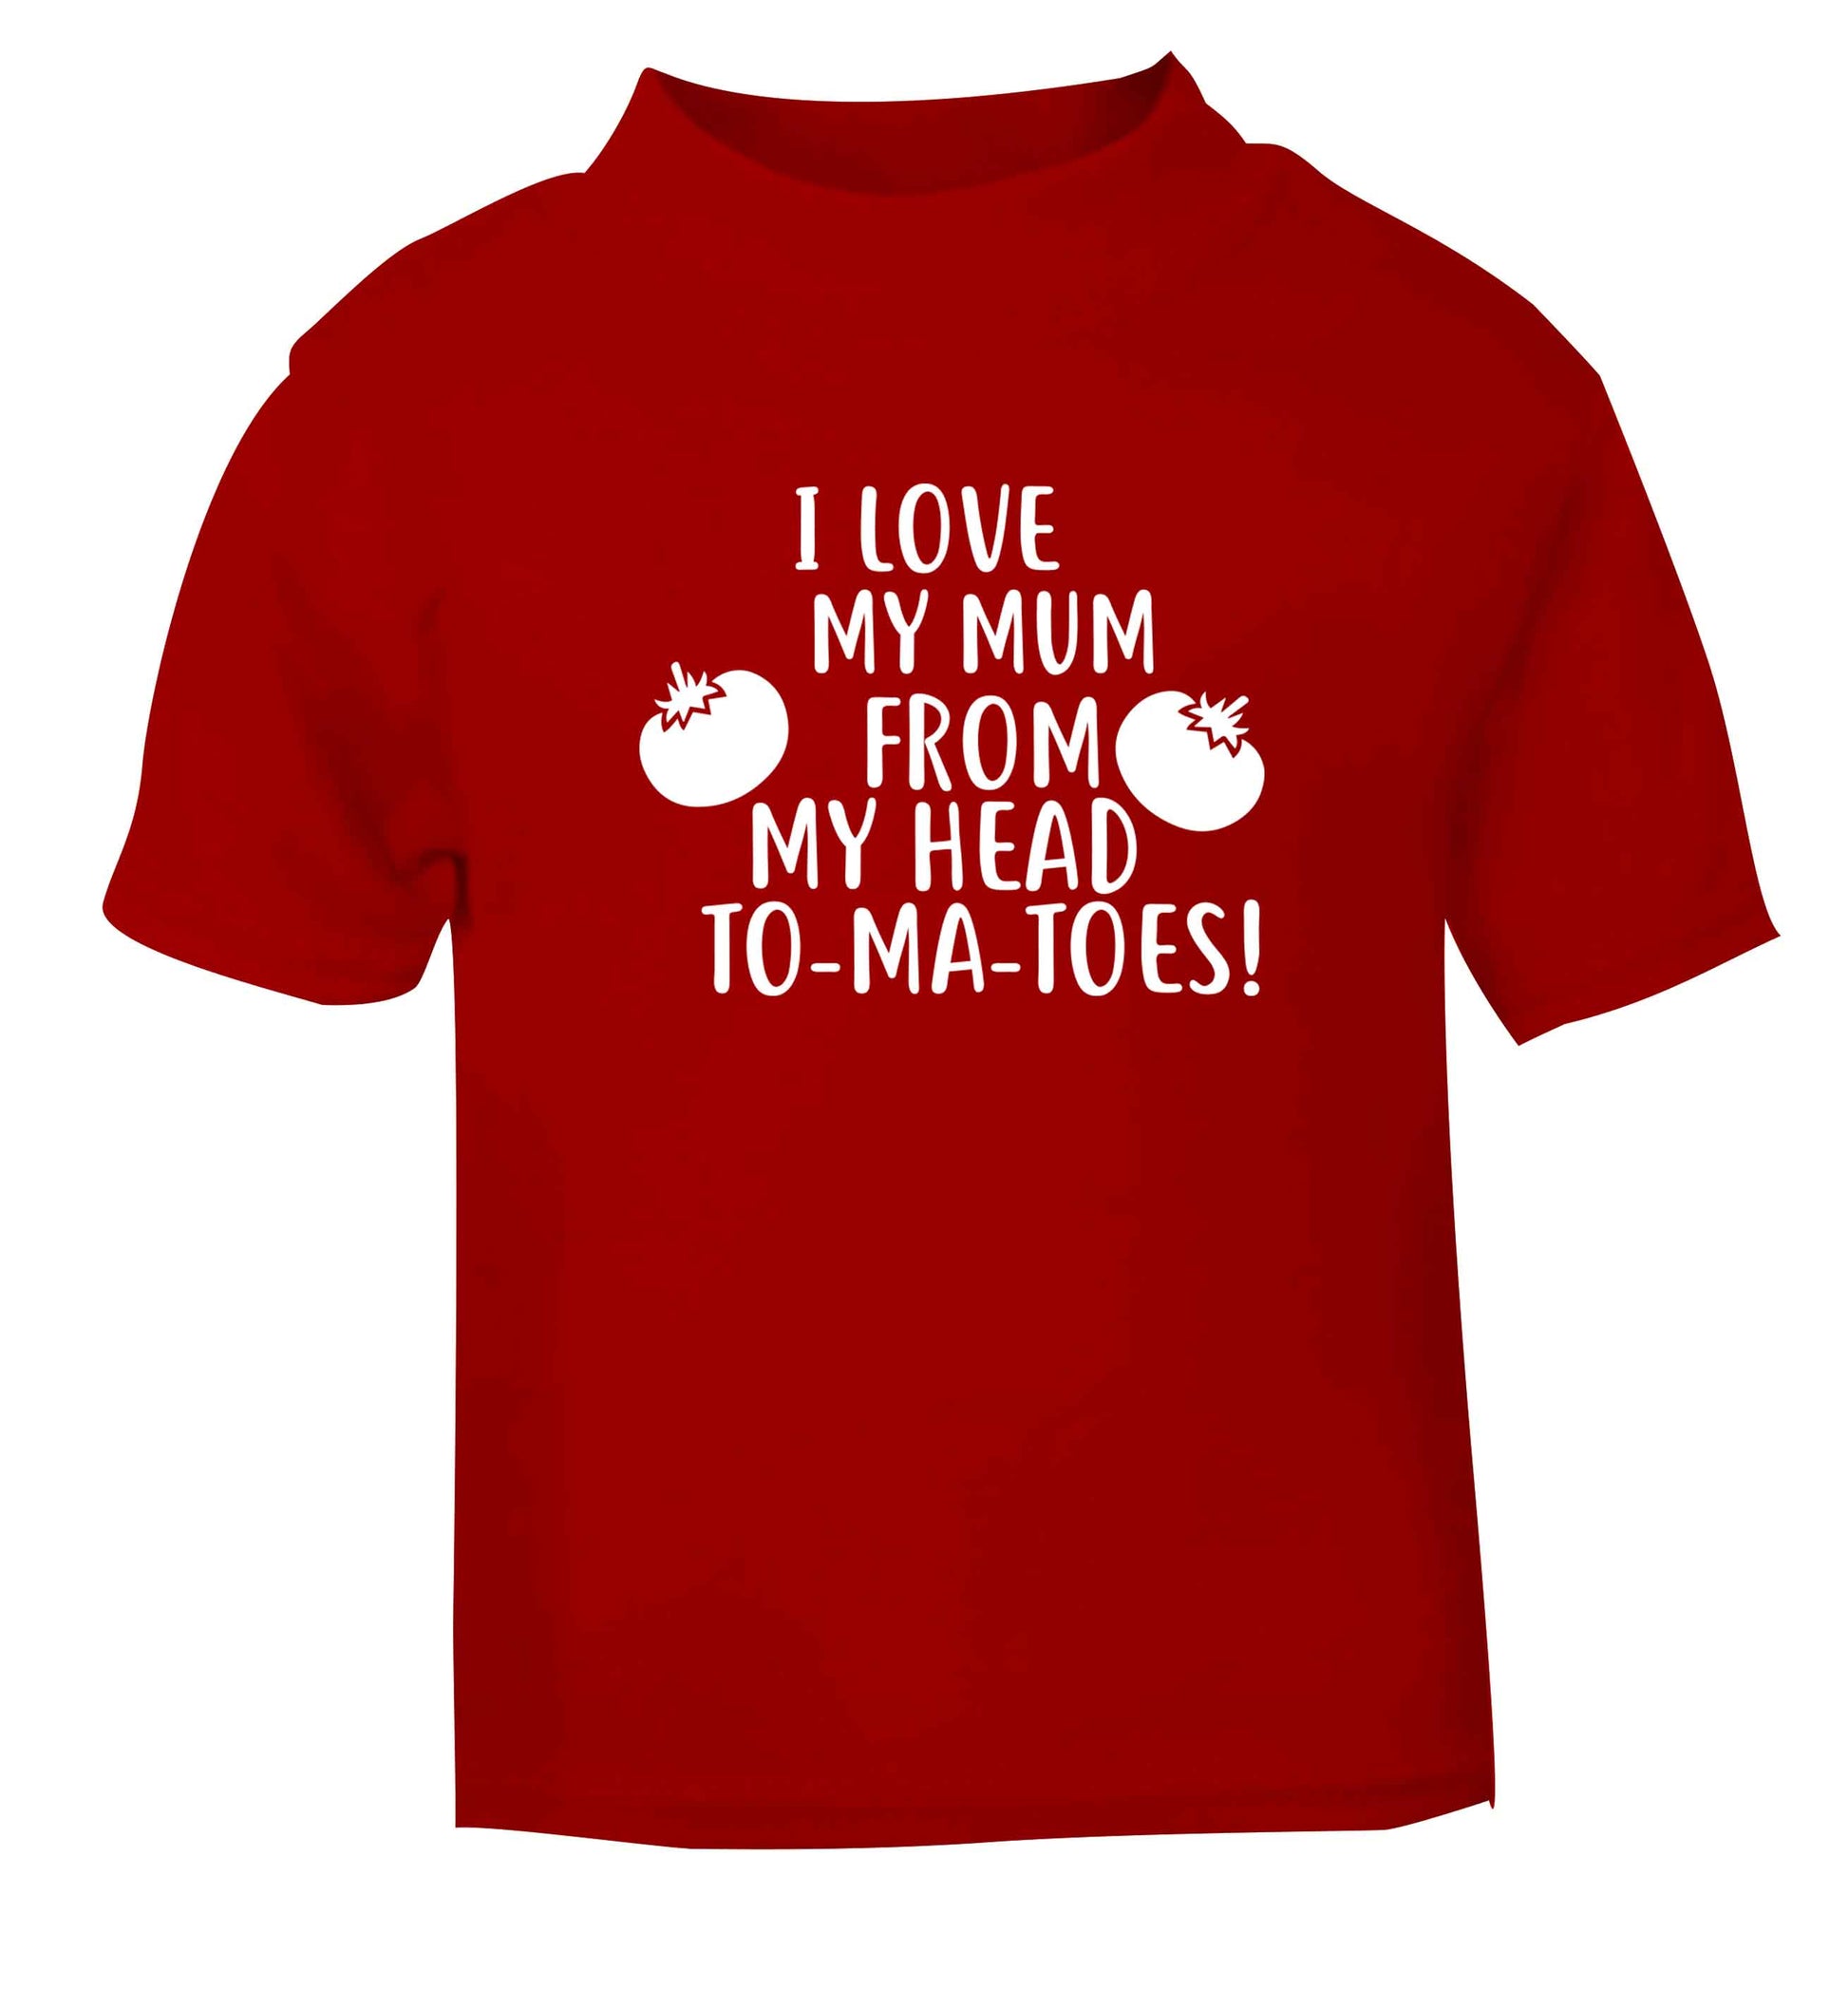 I love my mum from my head to-my-toes! red baby toddler Tshirt 2 Years